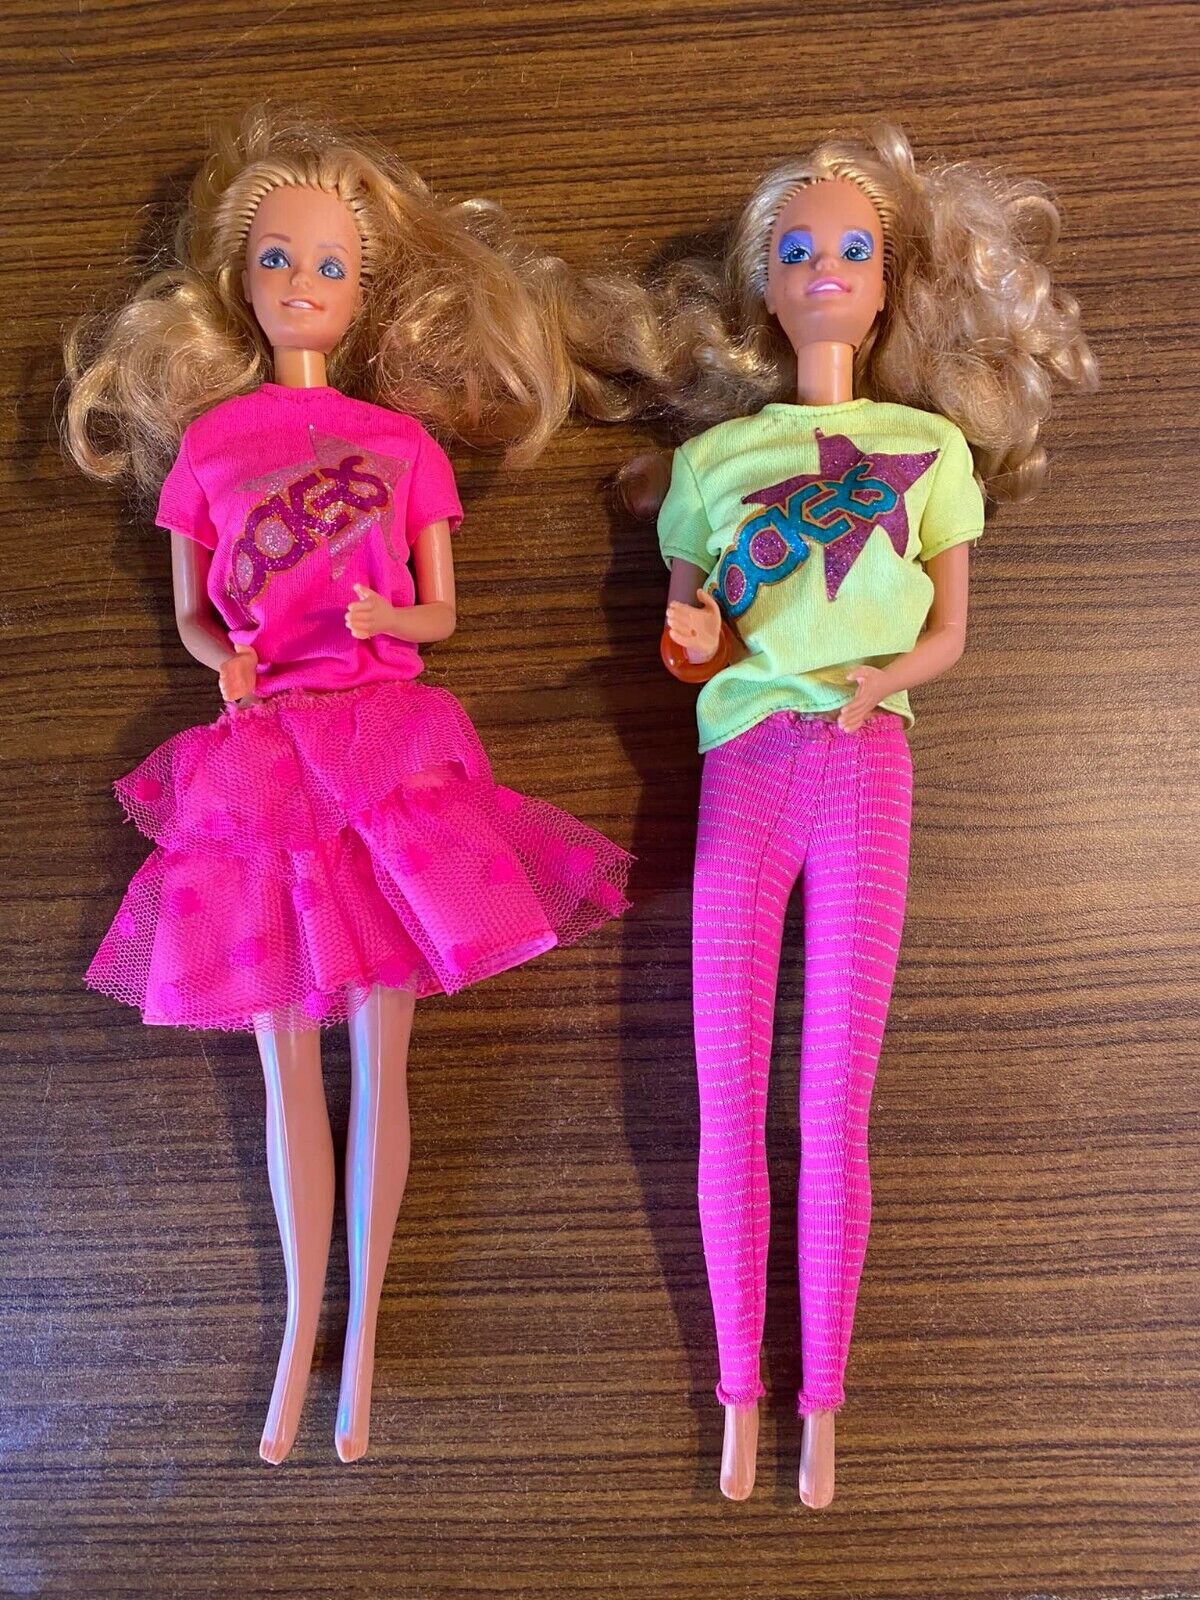 Pair of Vintage Barbie and the Rockers Dolls w/ Outfits